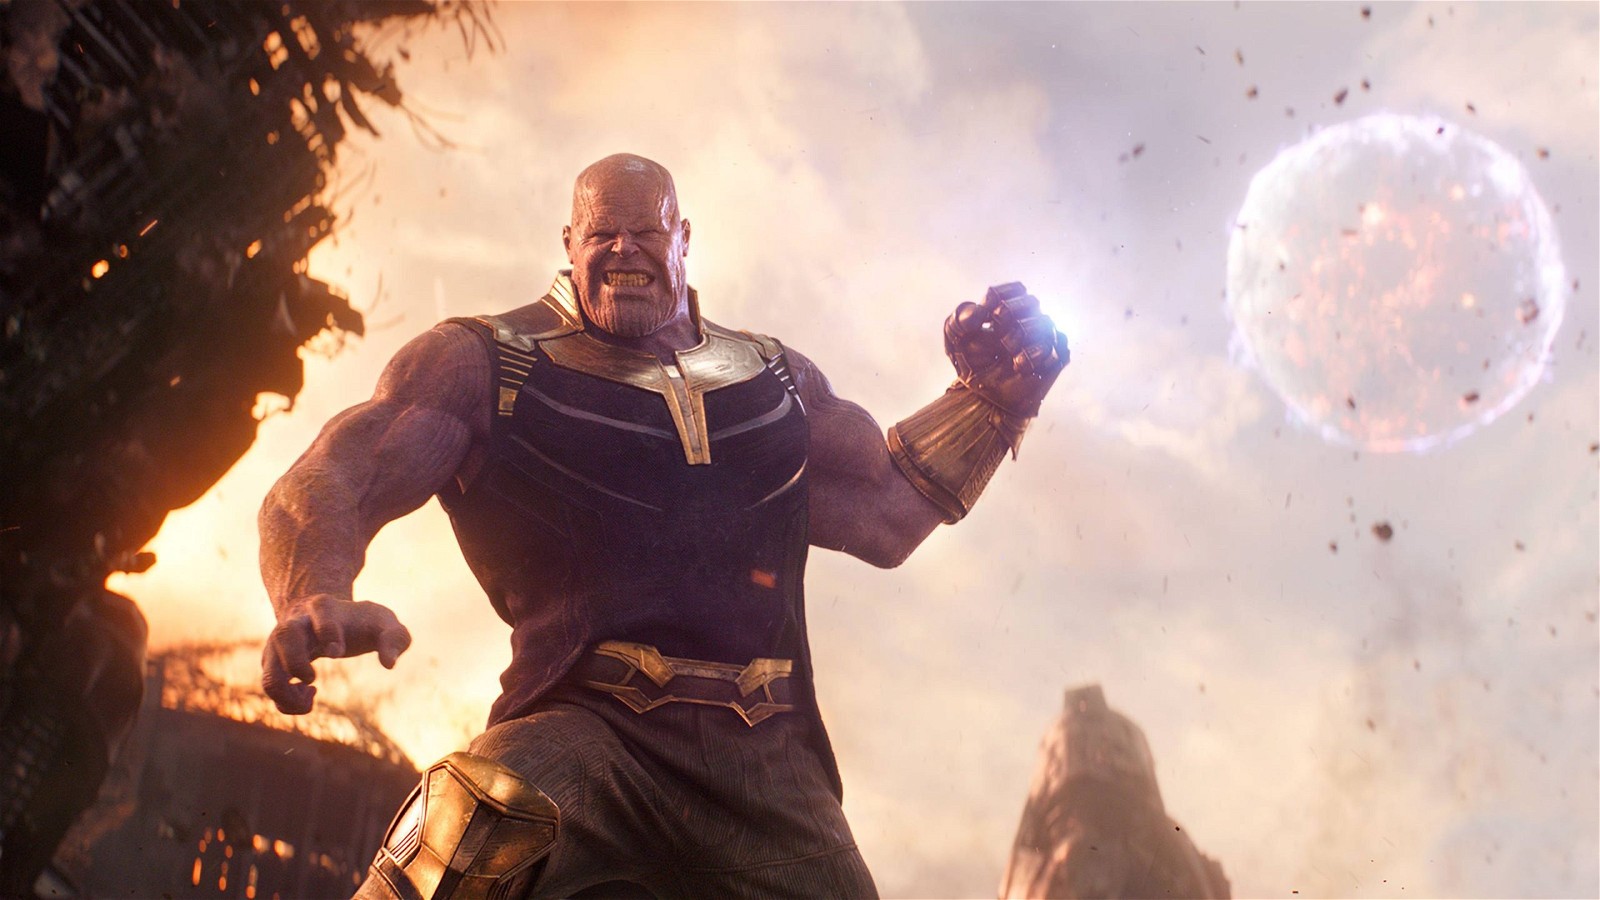 The character of Thanos is played by Josh Brolin in the MCU.